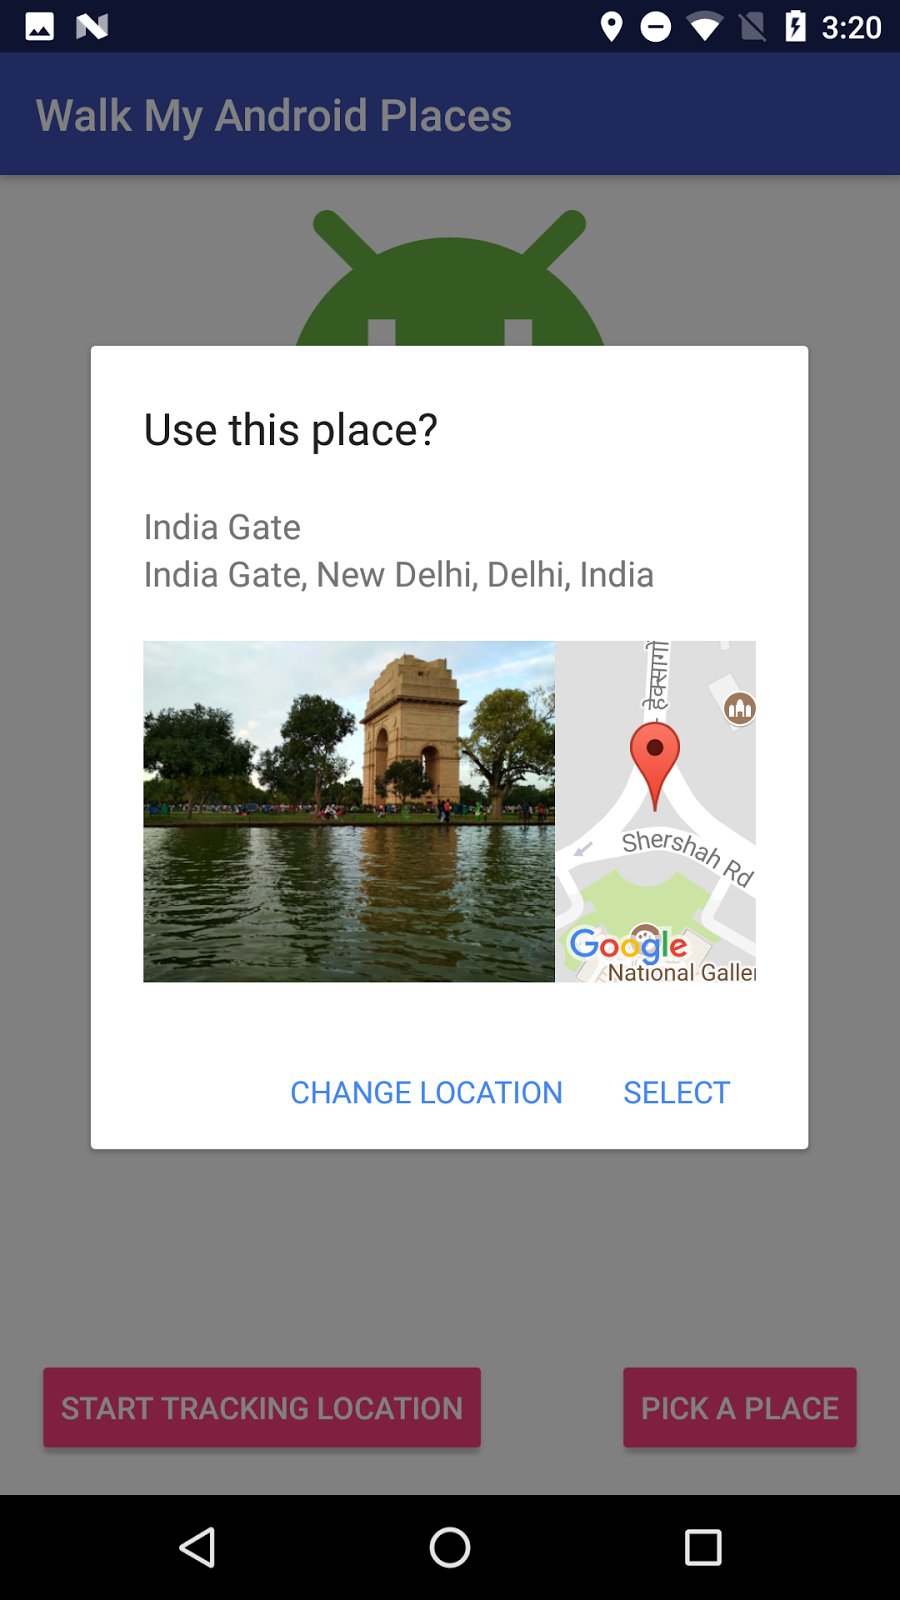  The place-picker UI allows the user to select a place